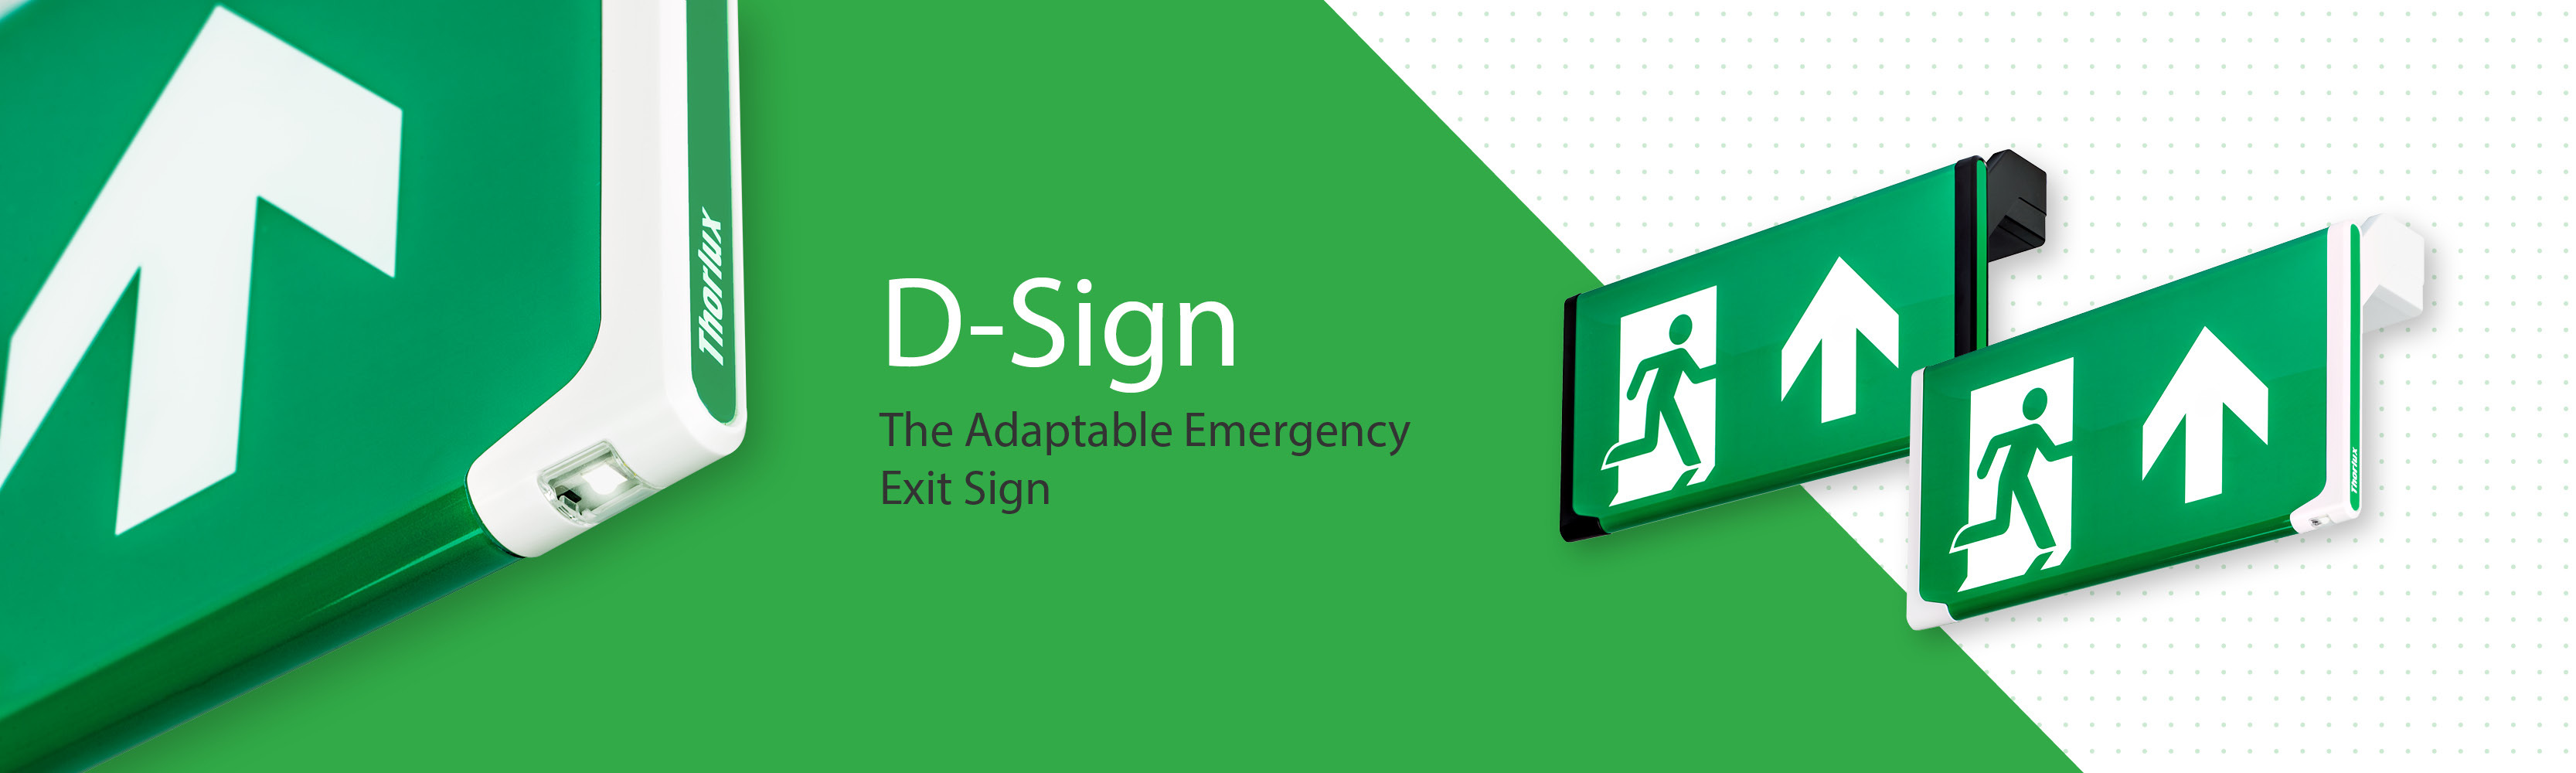 D-Sign – The adaptable Emergency Exit sign